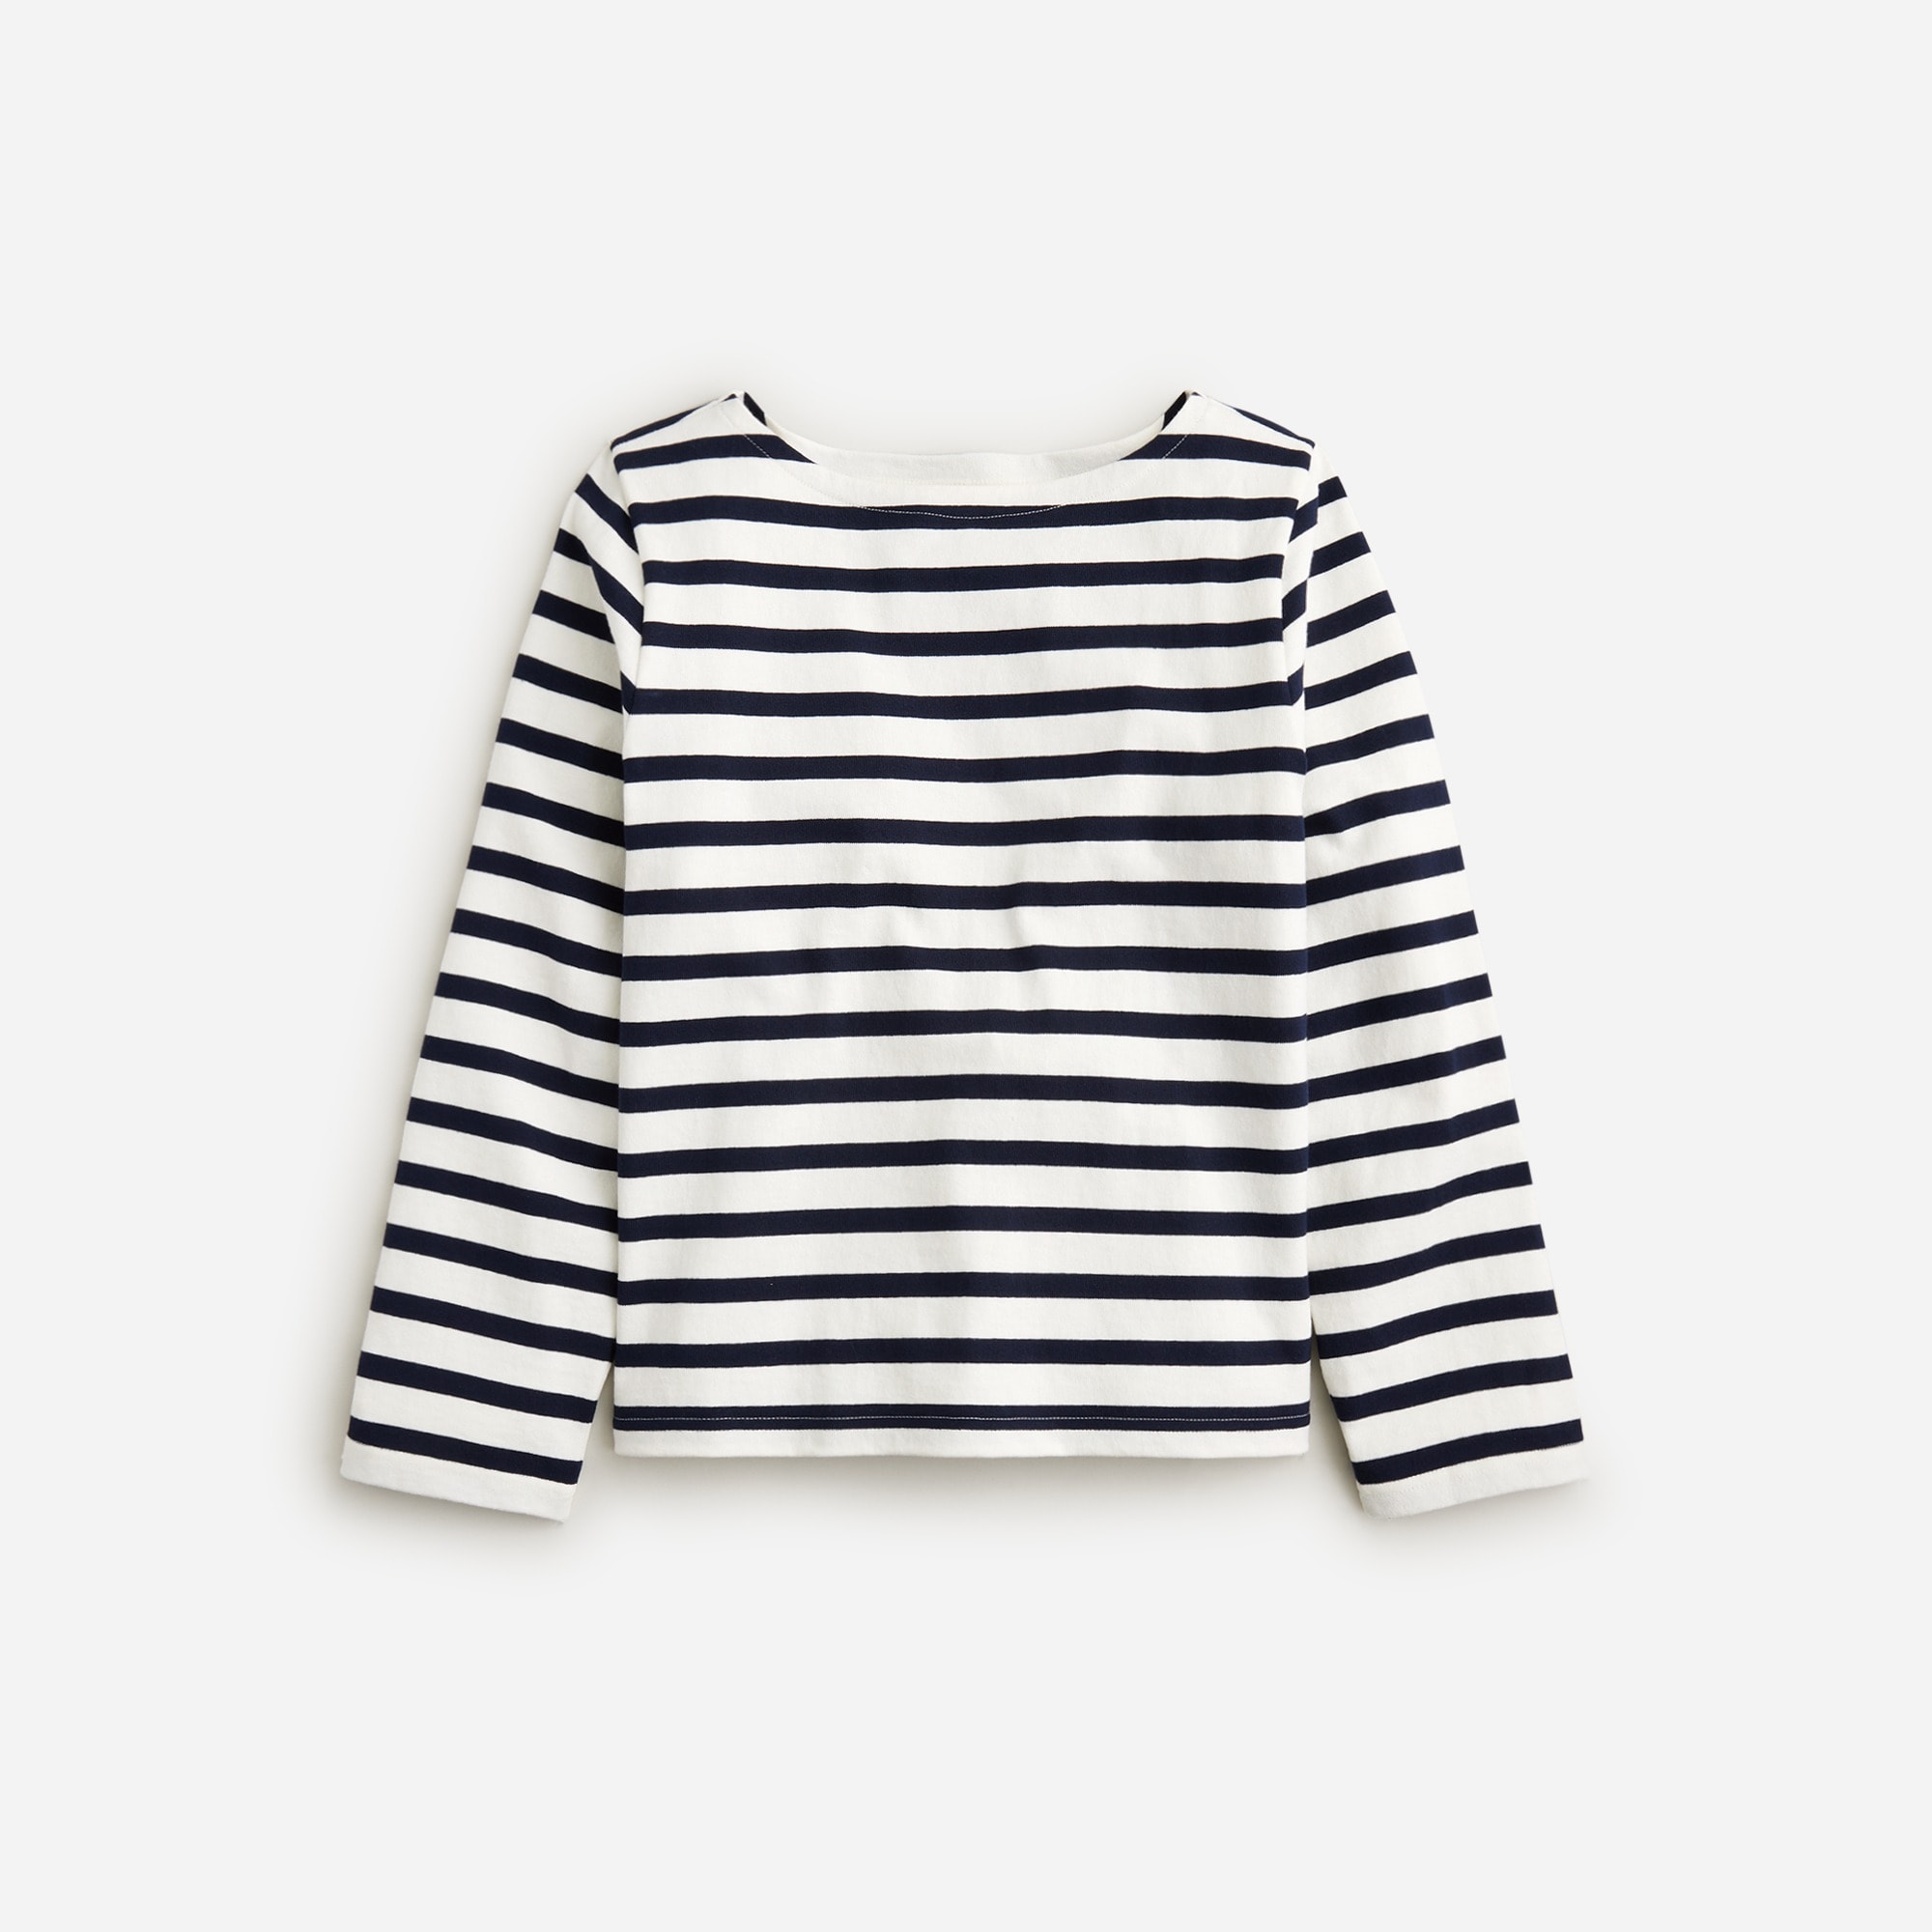  Classic mariner cloth boatneck T-shirt in stripe